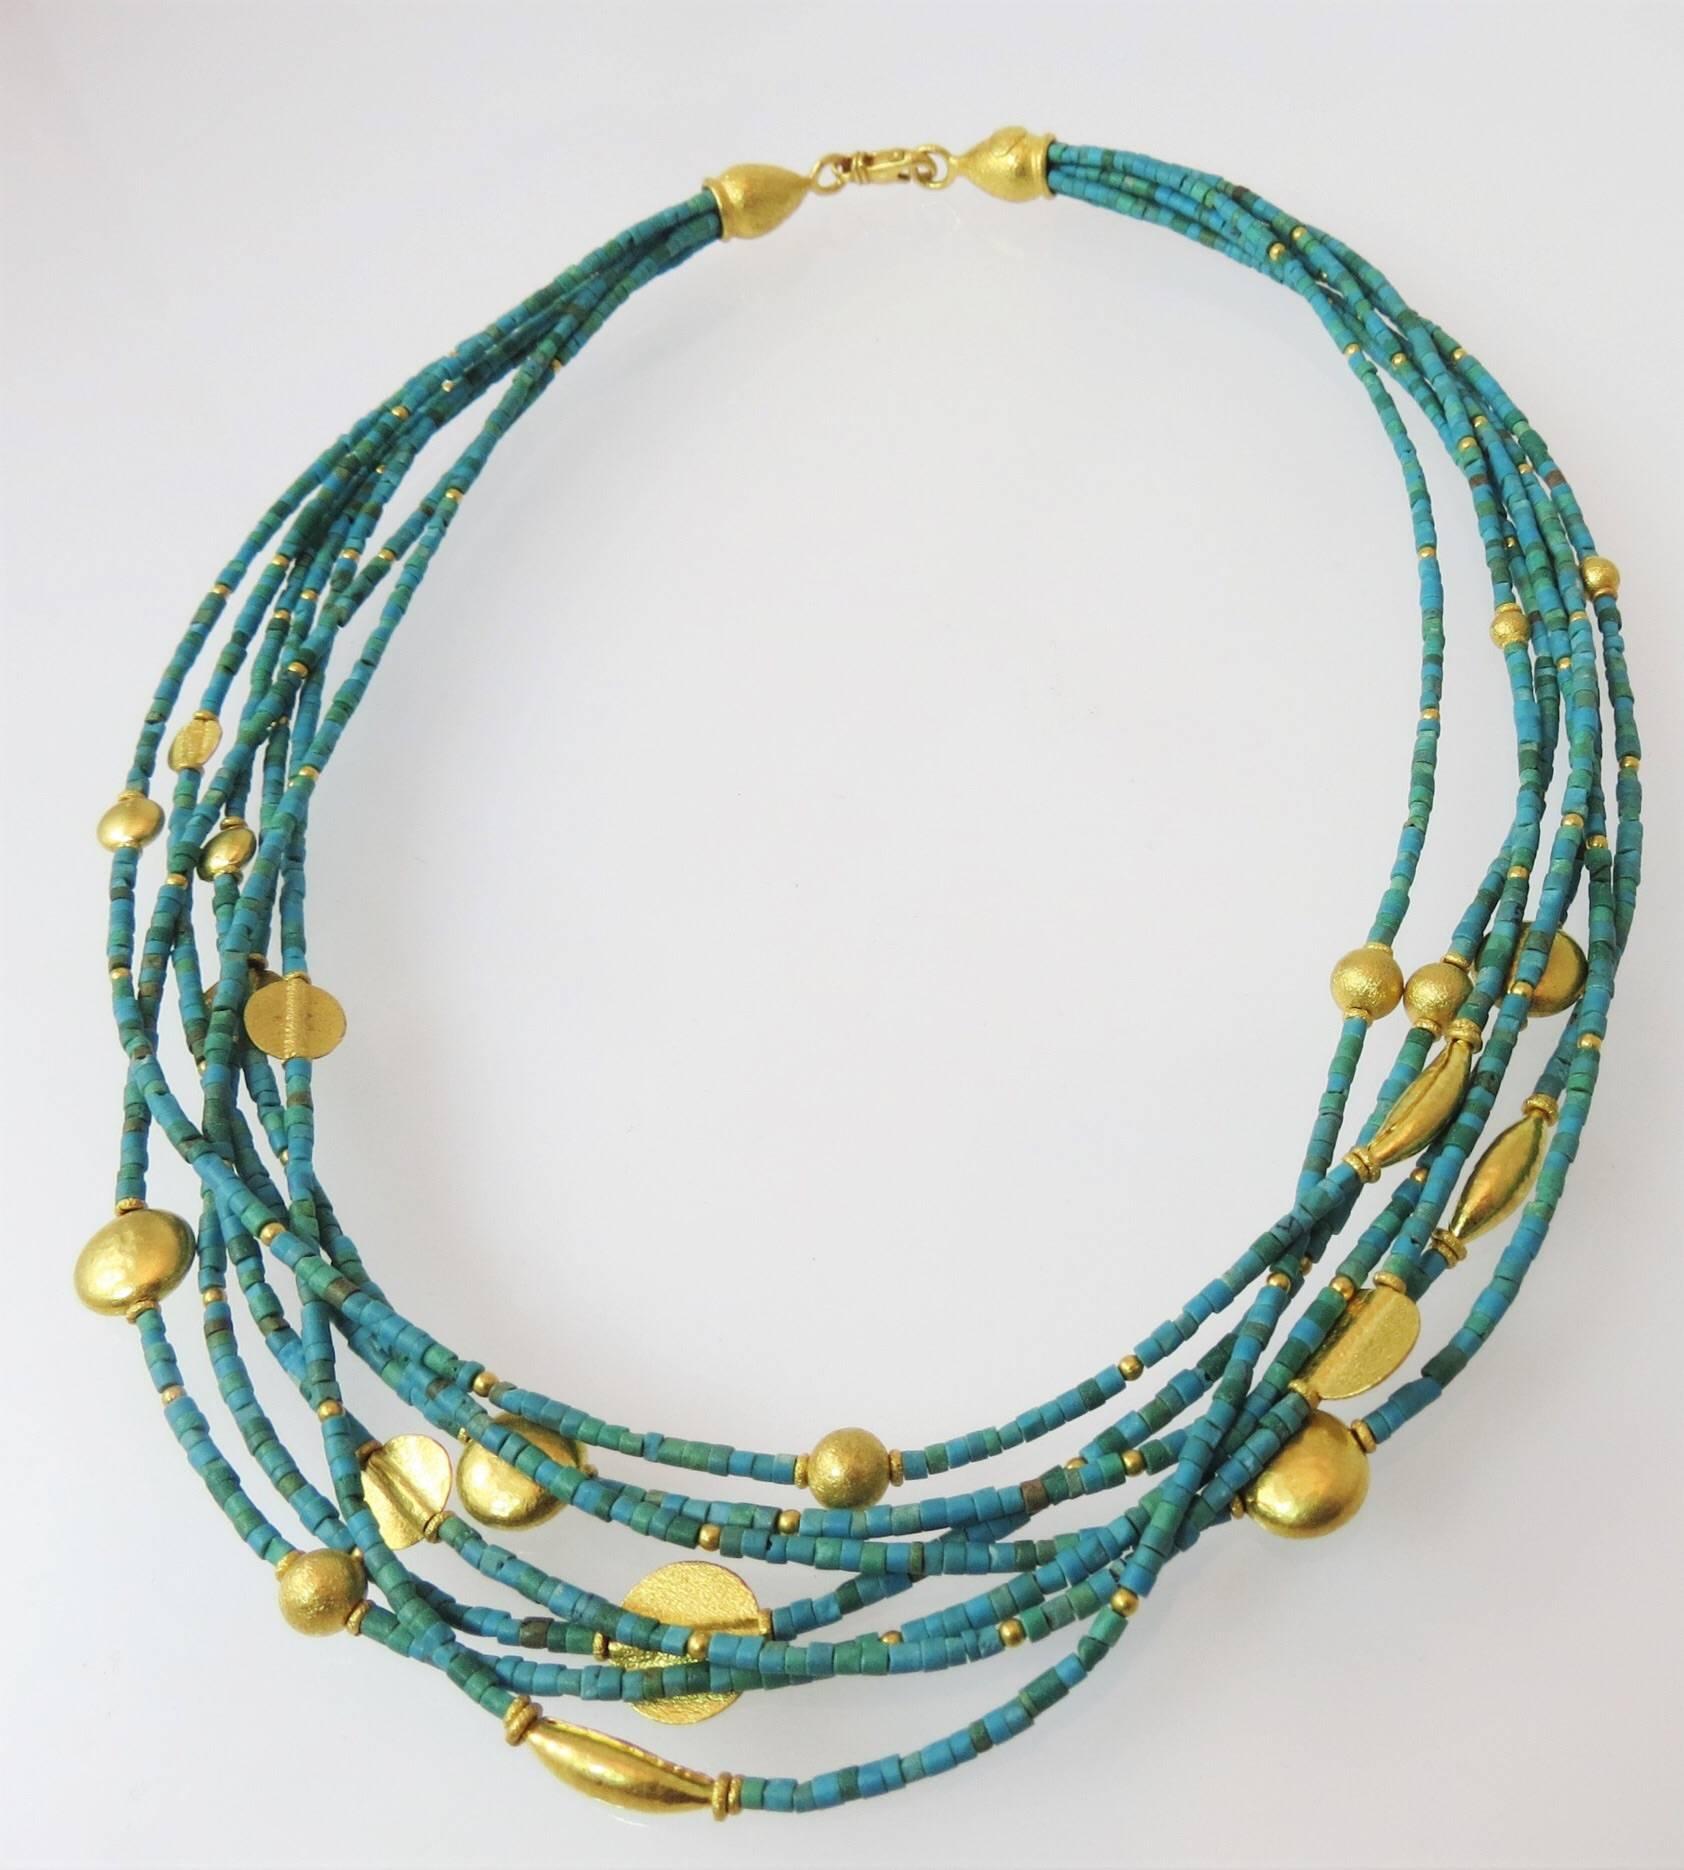 Fabulous 24K yellow gold and turquoise seven strand bead necklace, with multi-shape 24K yellow gold elements and 24K yellow gold clasp.  18 inches in length.